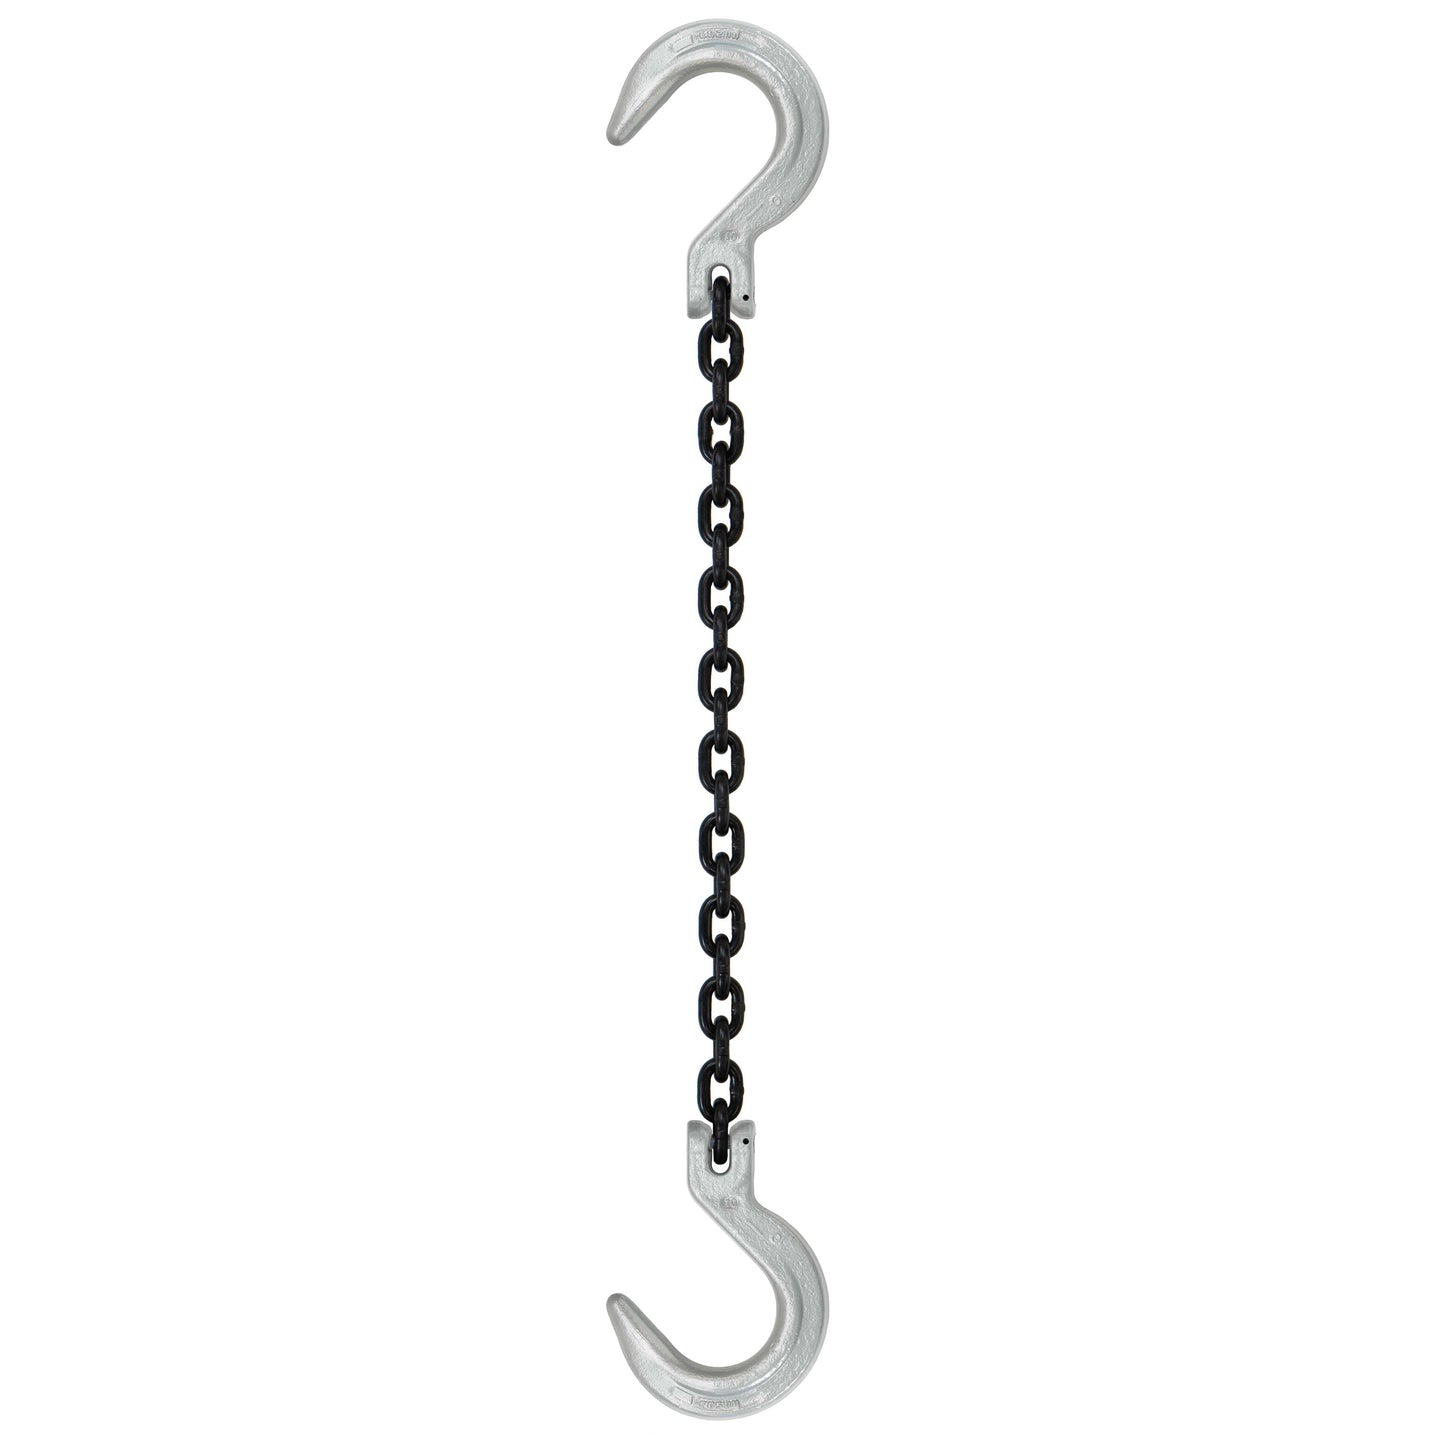 516 inch x 12 foot Domestic Single Leg Chain Sling w Crosby Foundry & Foundry Hooks Grade 100 image 1 of 2